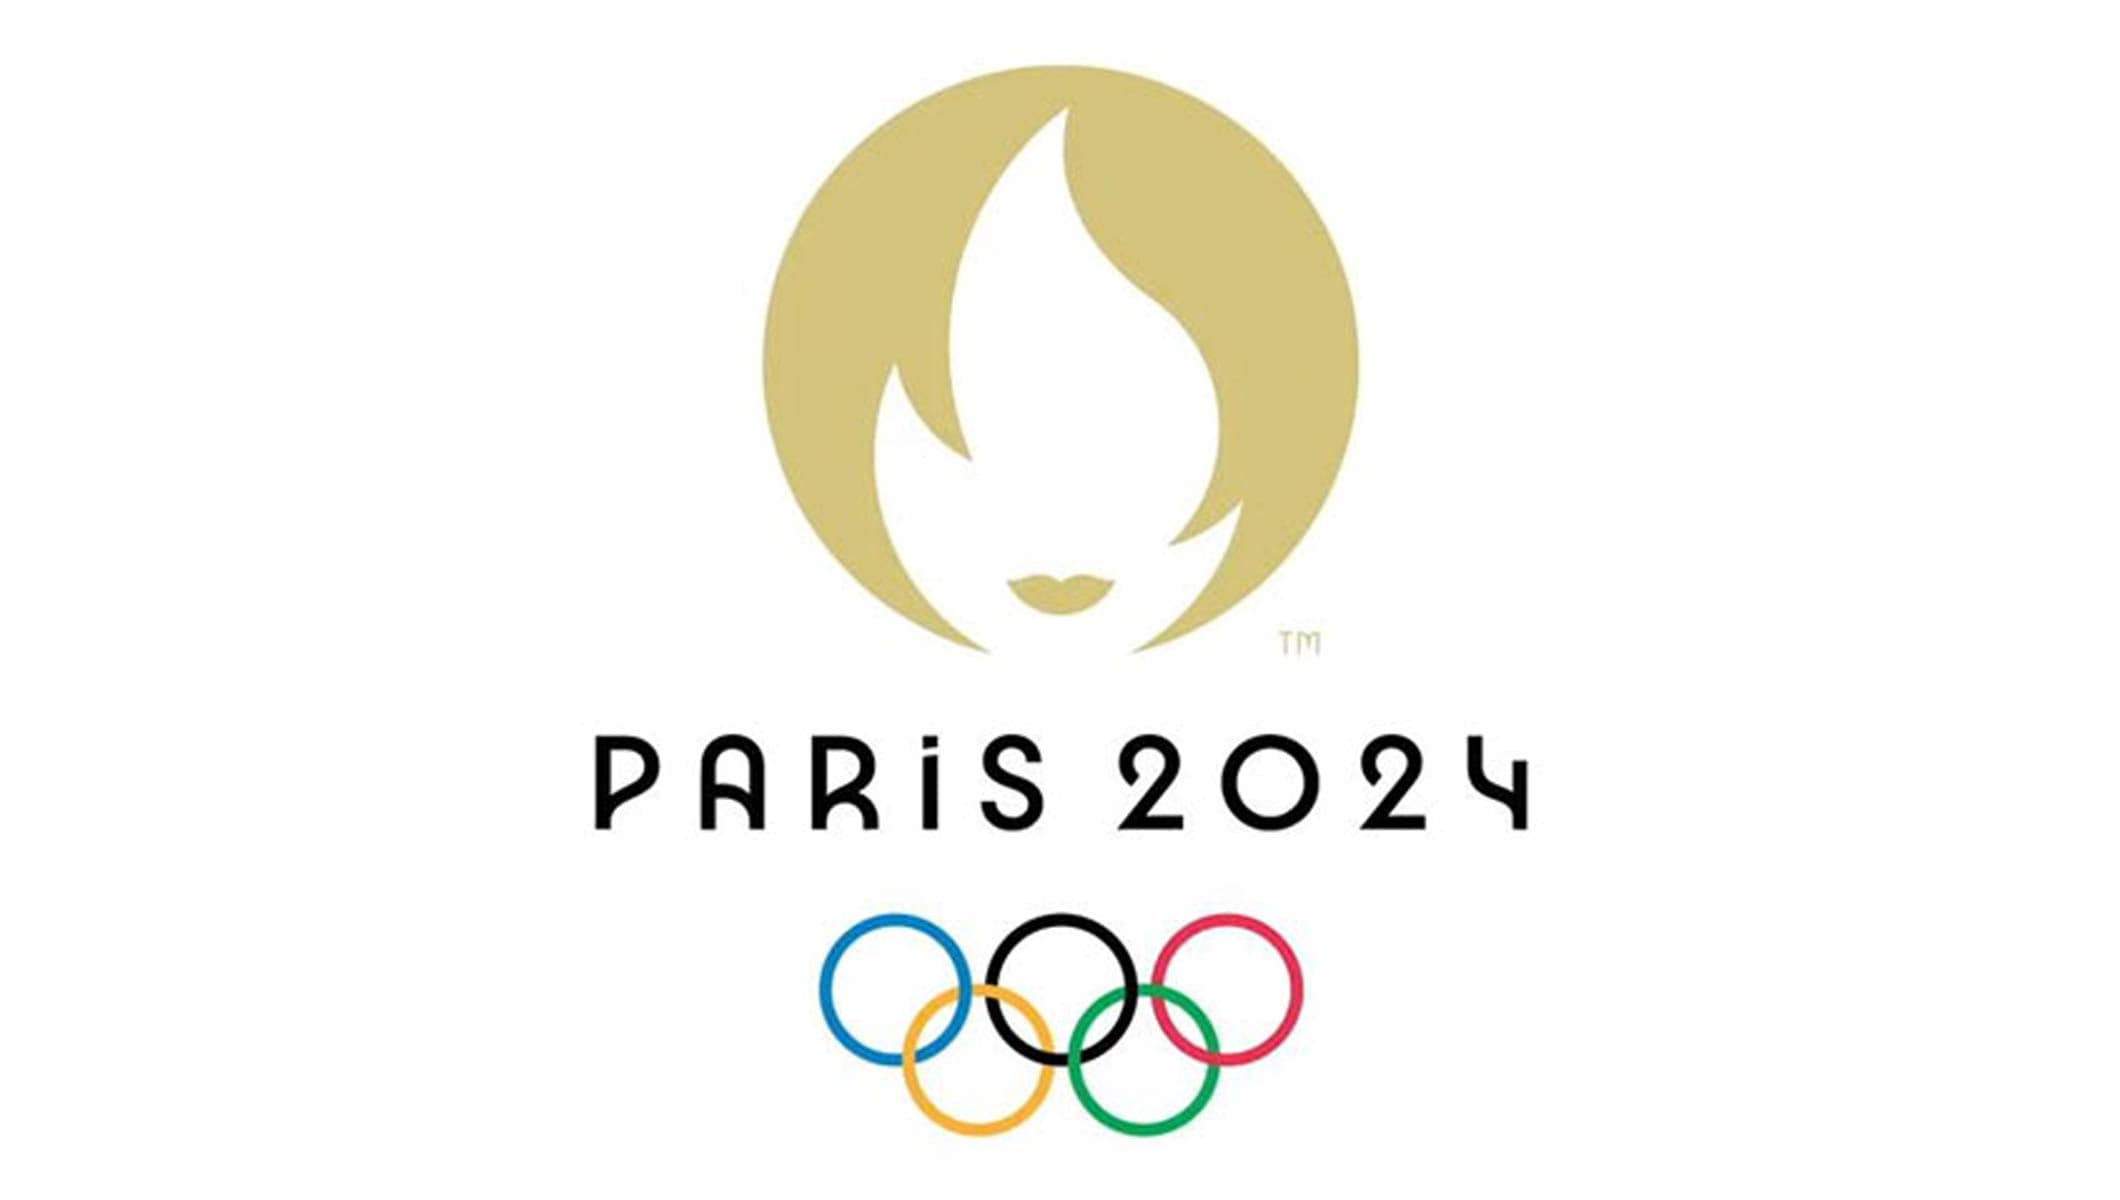 Gender equality and youth at the heart of the Paris 2024 Olympic Sports